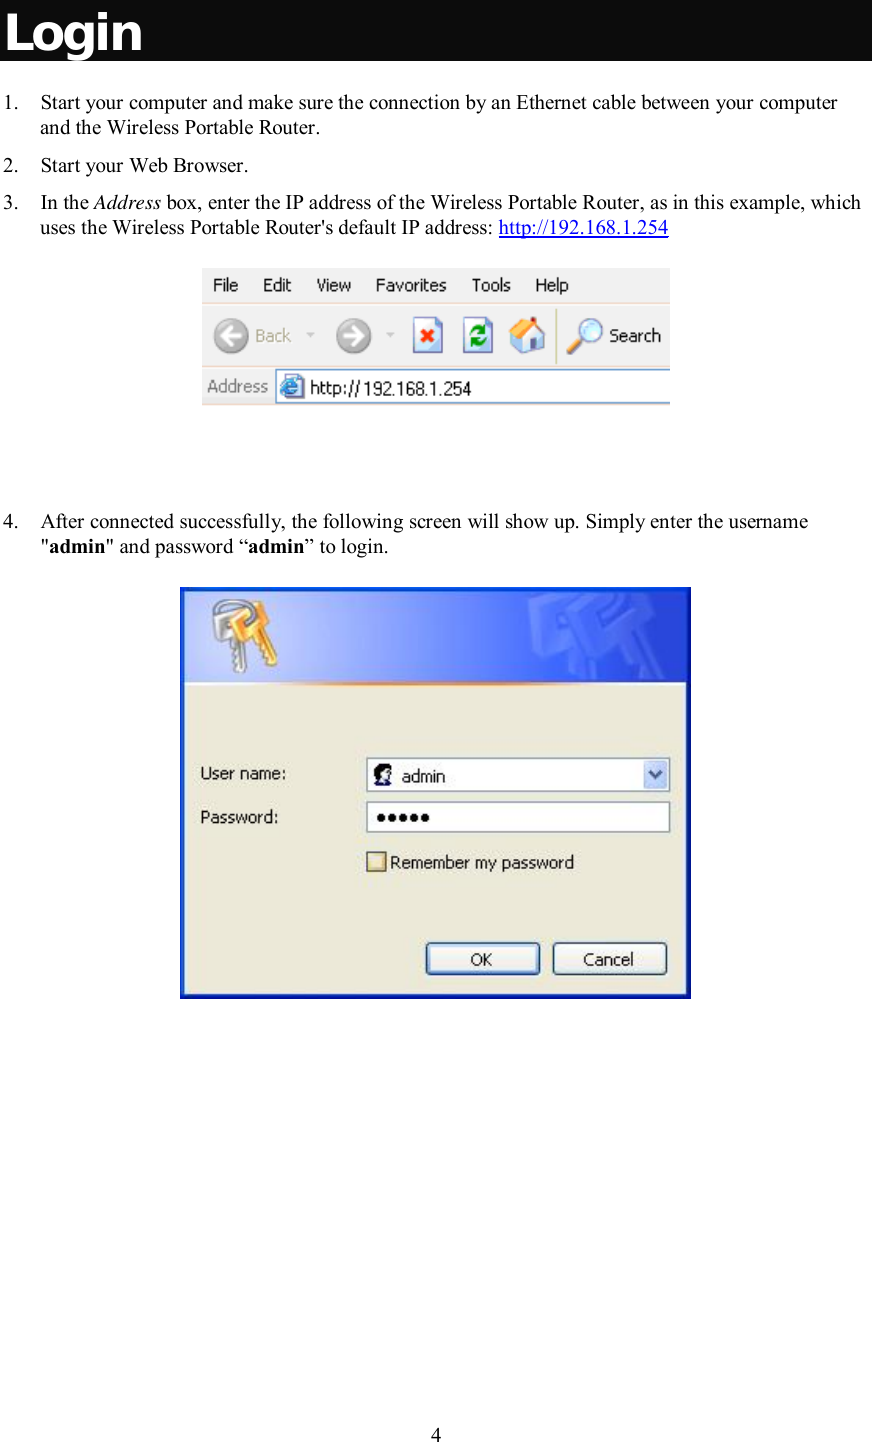    4  Login 1. Start your computer and make sure the connection by an Ethernet cable between your computer and the Wireless Portable Router. 2. Start your Web Browser. 3. In the Address box, enter the IP address of the Wireless Portable Router, as in this example, which uses the Wireless Portable Router&apos;s default IP address: http://192.168.1.254    4. After connected successfully, the following screen will show up. Simply enter the username &quot;admin&quot; and password “admin” to login.   